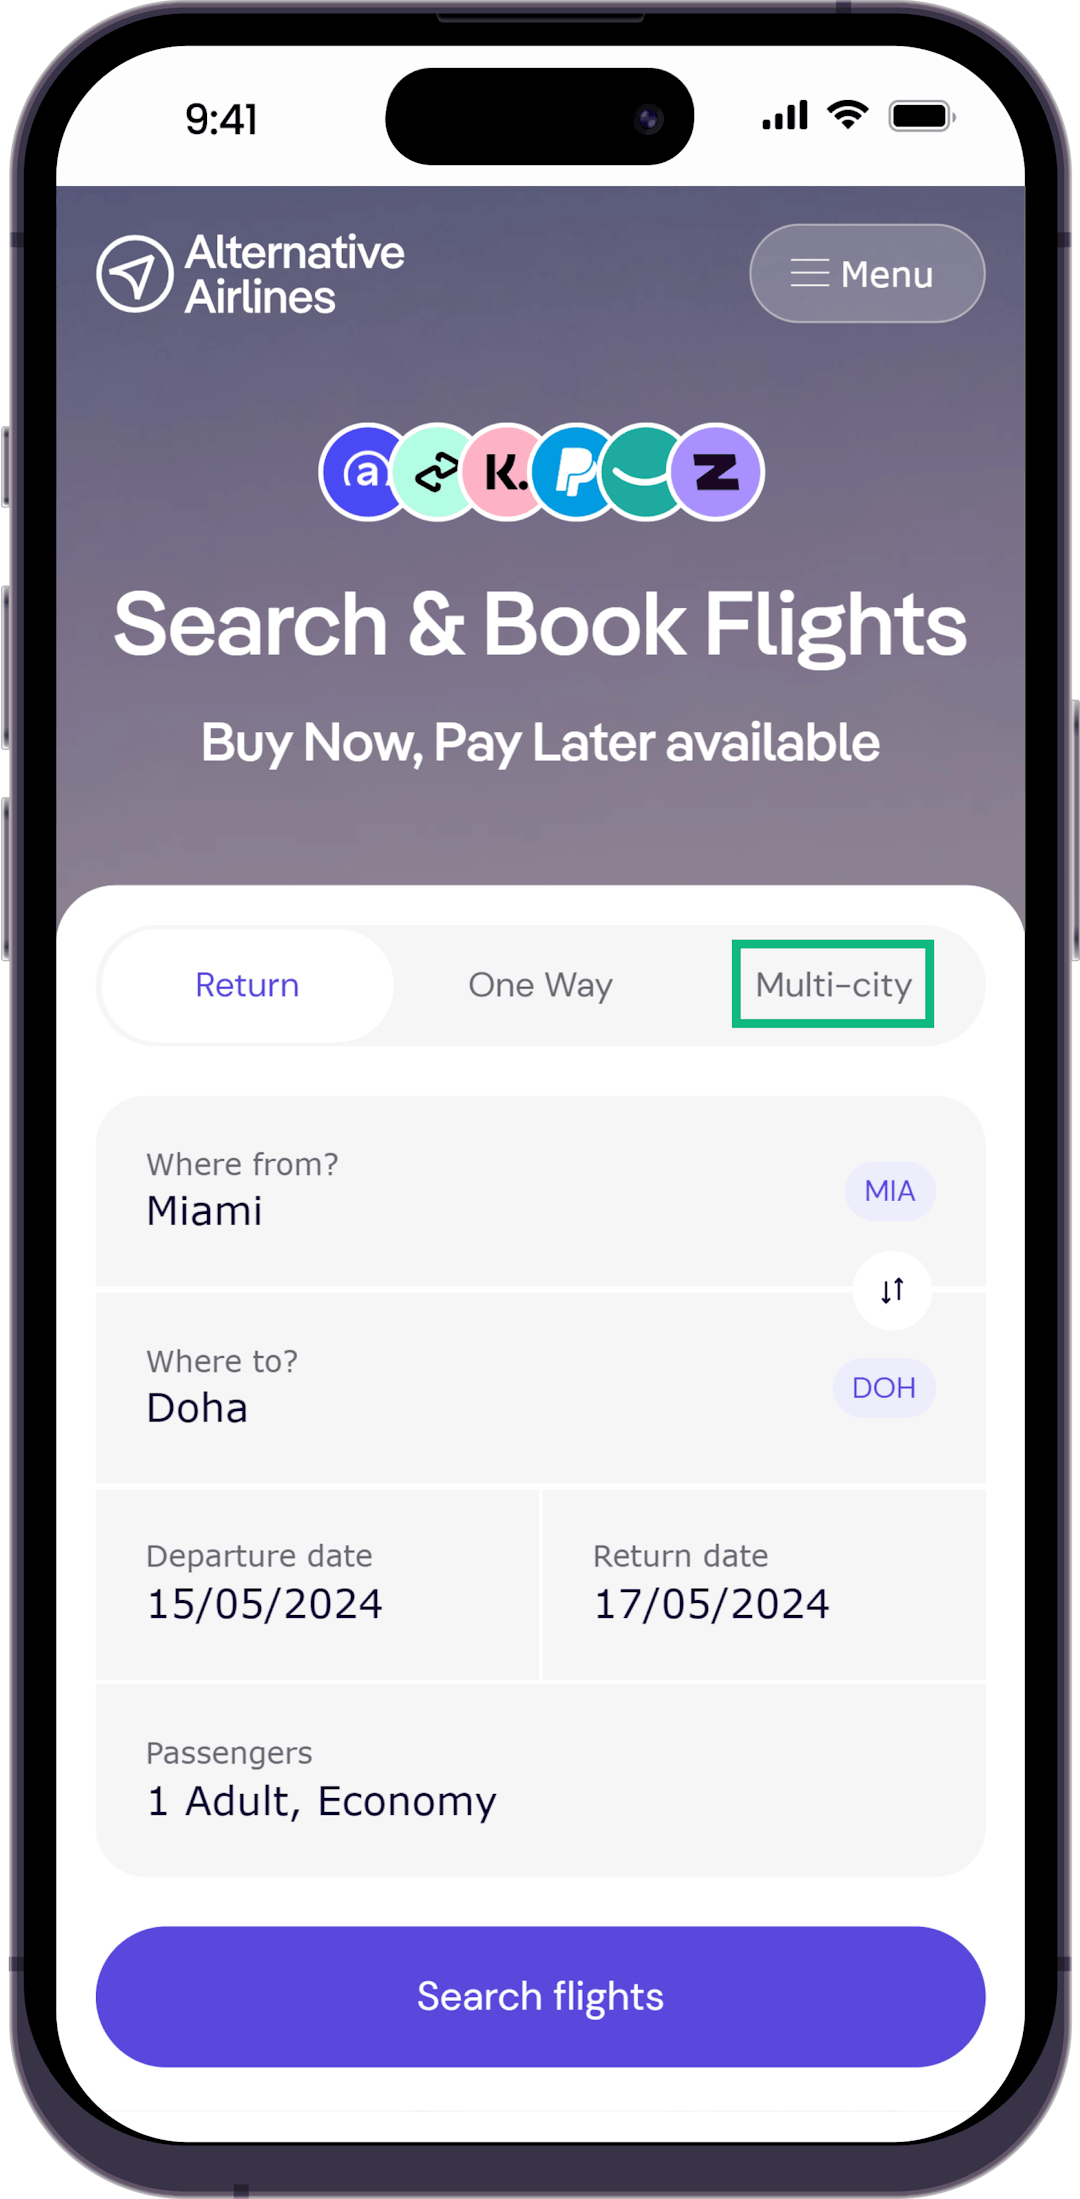 Step 1 - Select multi-city flights option in search form